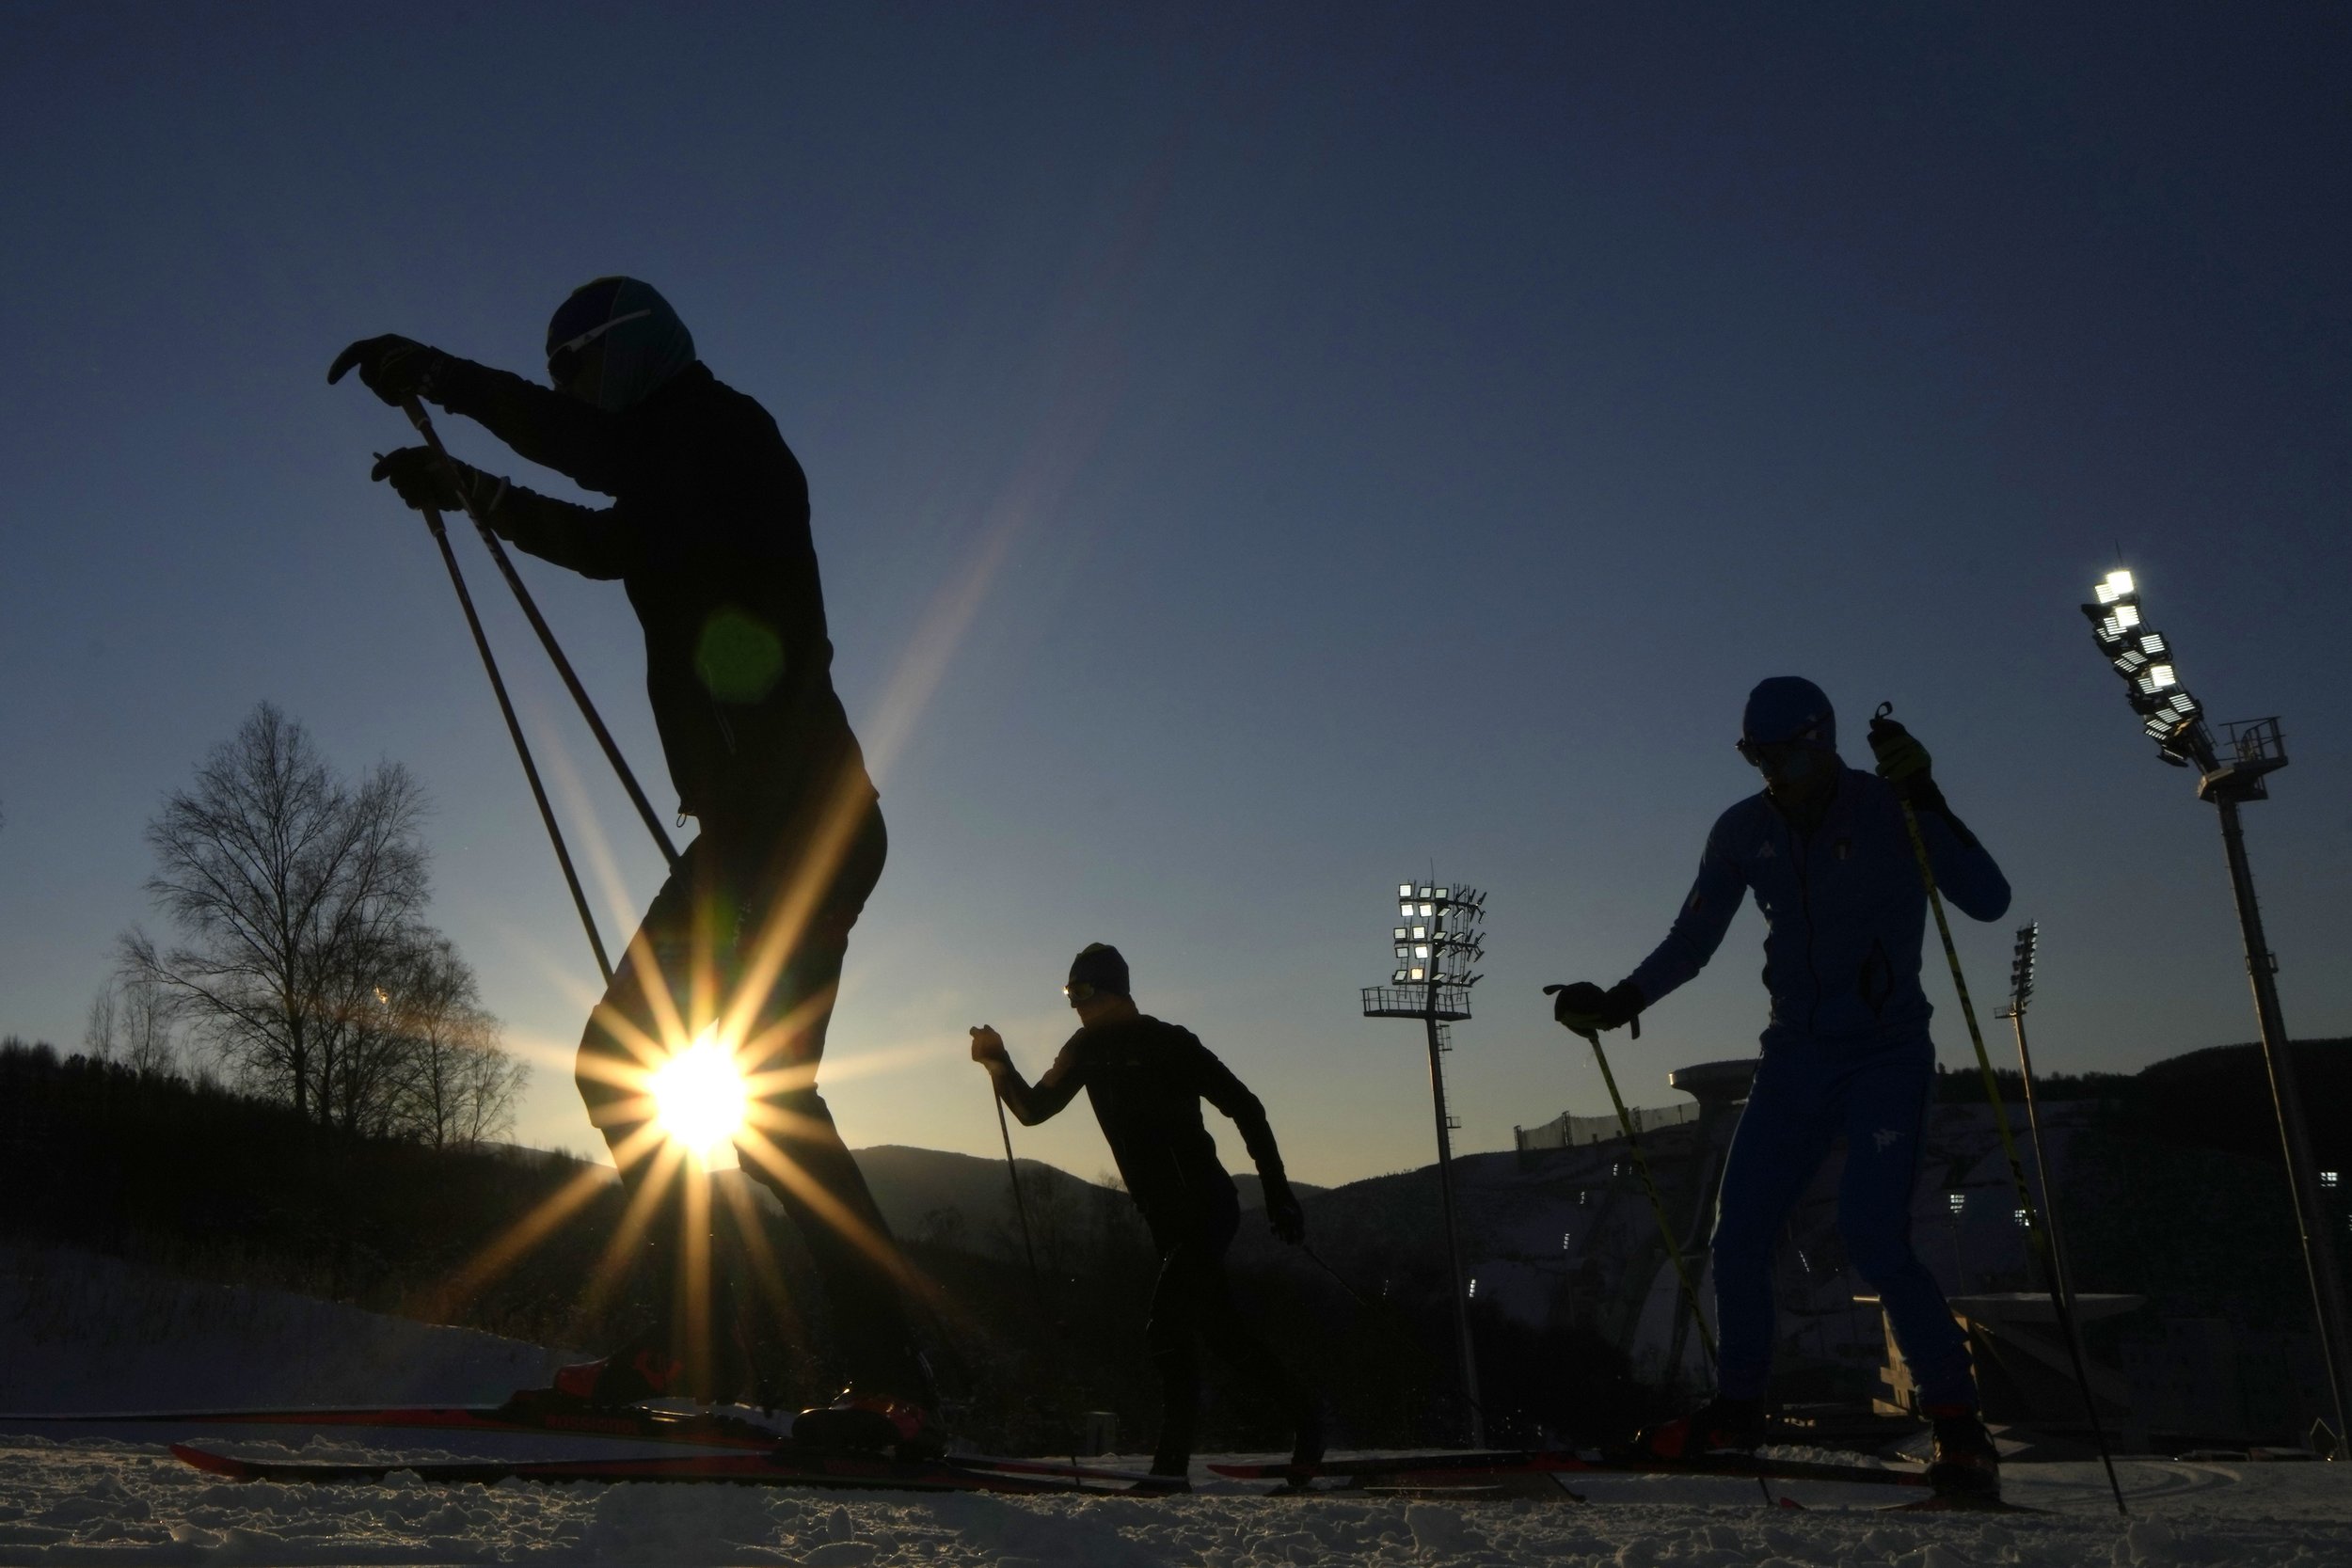  Biathletes train as the sun sets during a biathlon training session during the 2022 Winter Olympics, in Zhangjiakou, China, Monday, Feb. 14, 2022. (AP Photo/Kirsty Wigglesworth) 